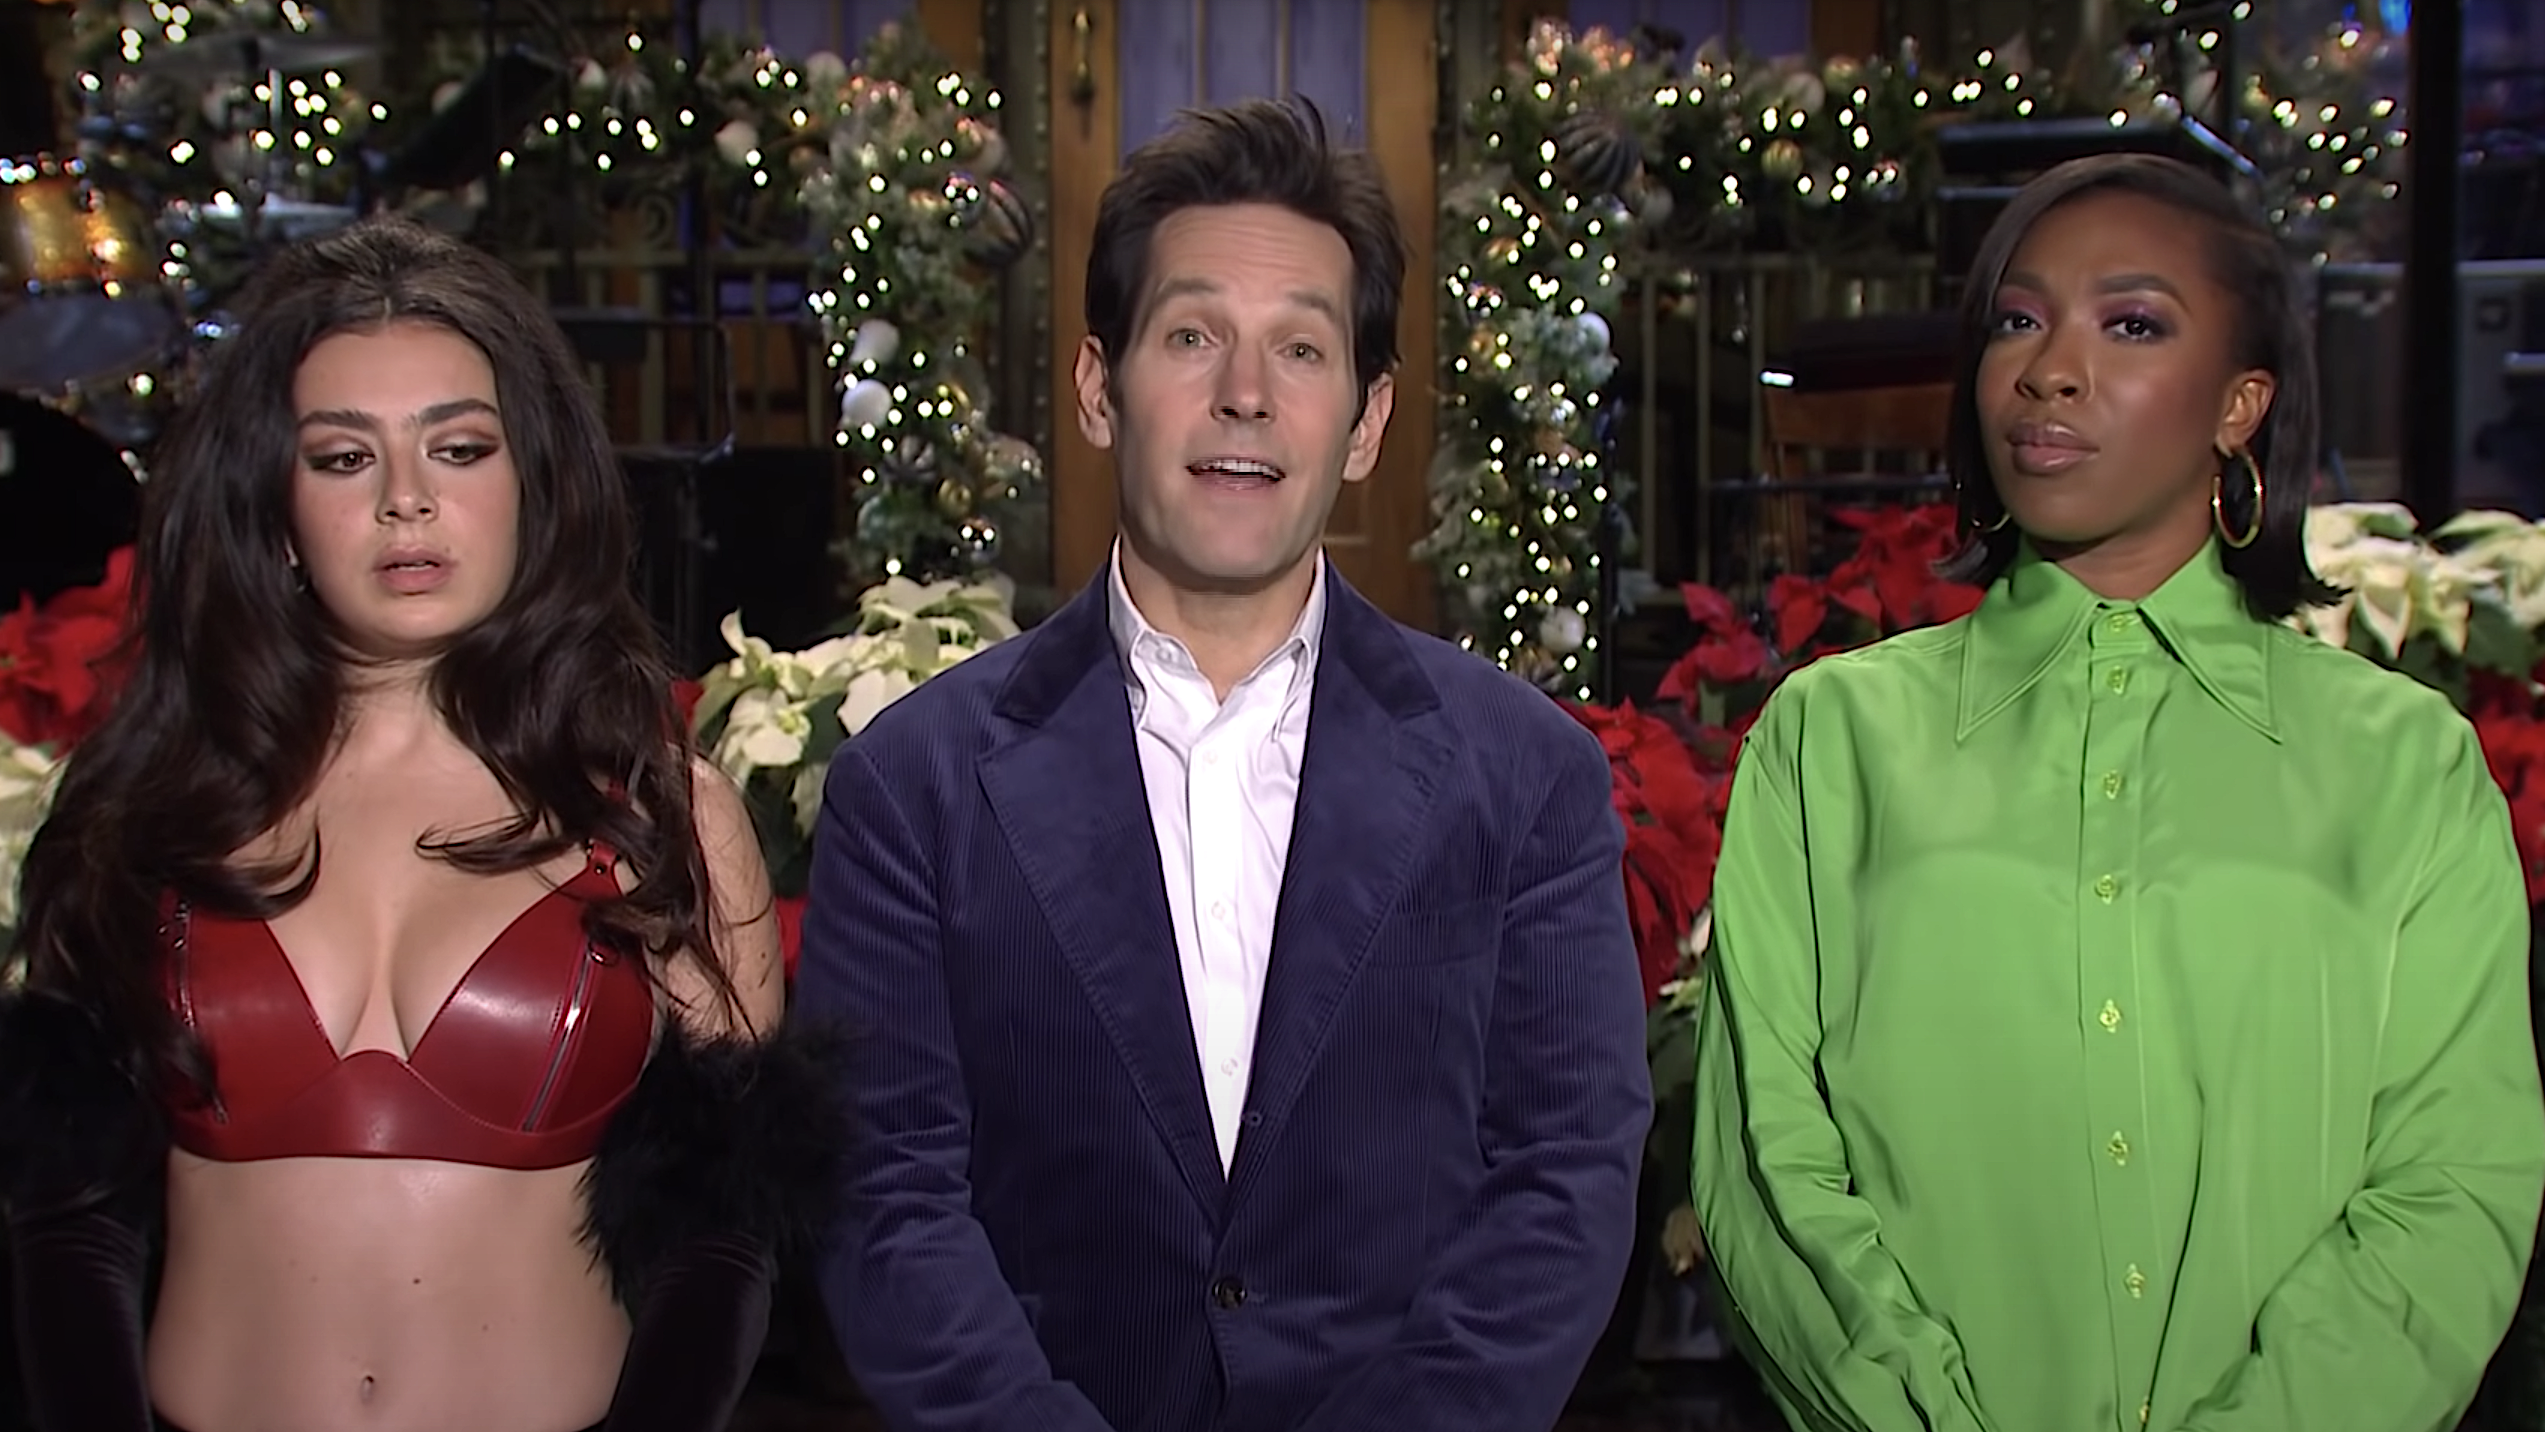 Paul Rudd prepares to join the Five-Timers Club in this week’s SNL promo